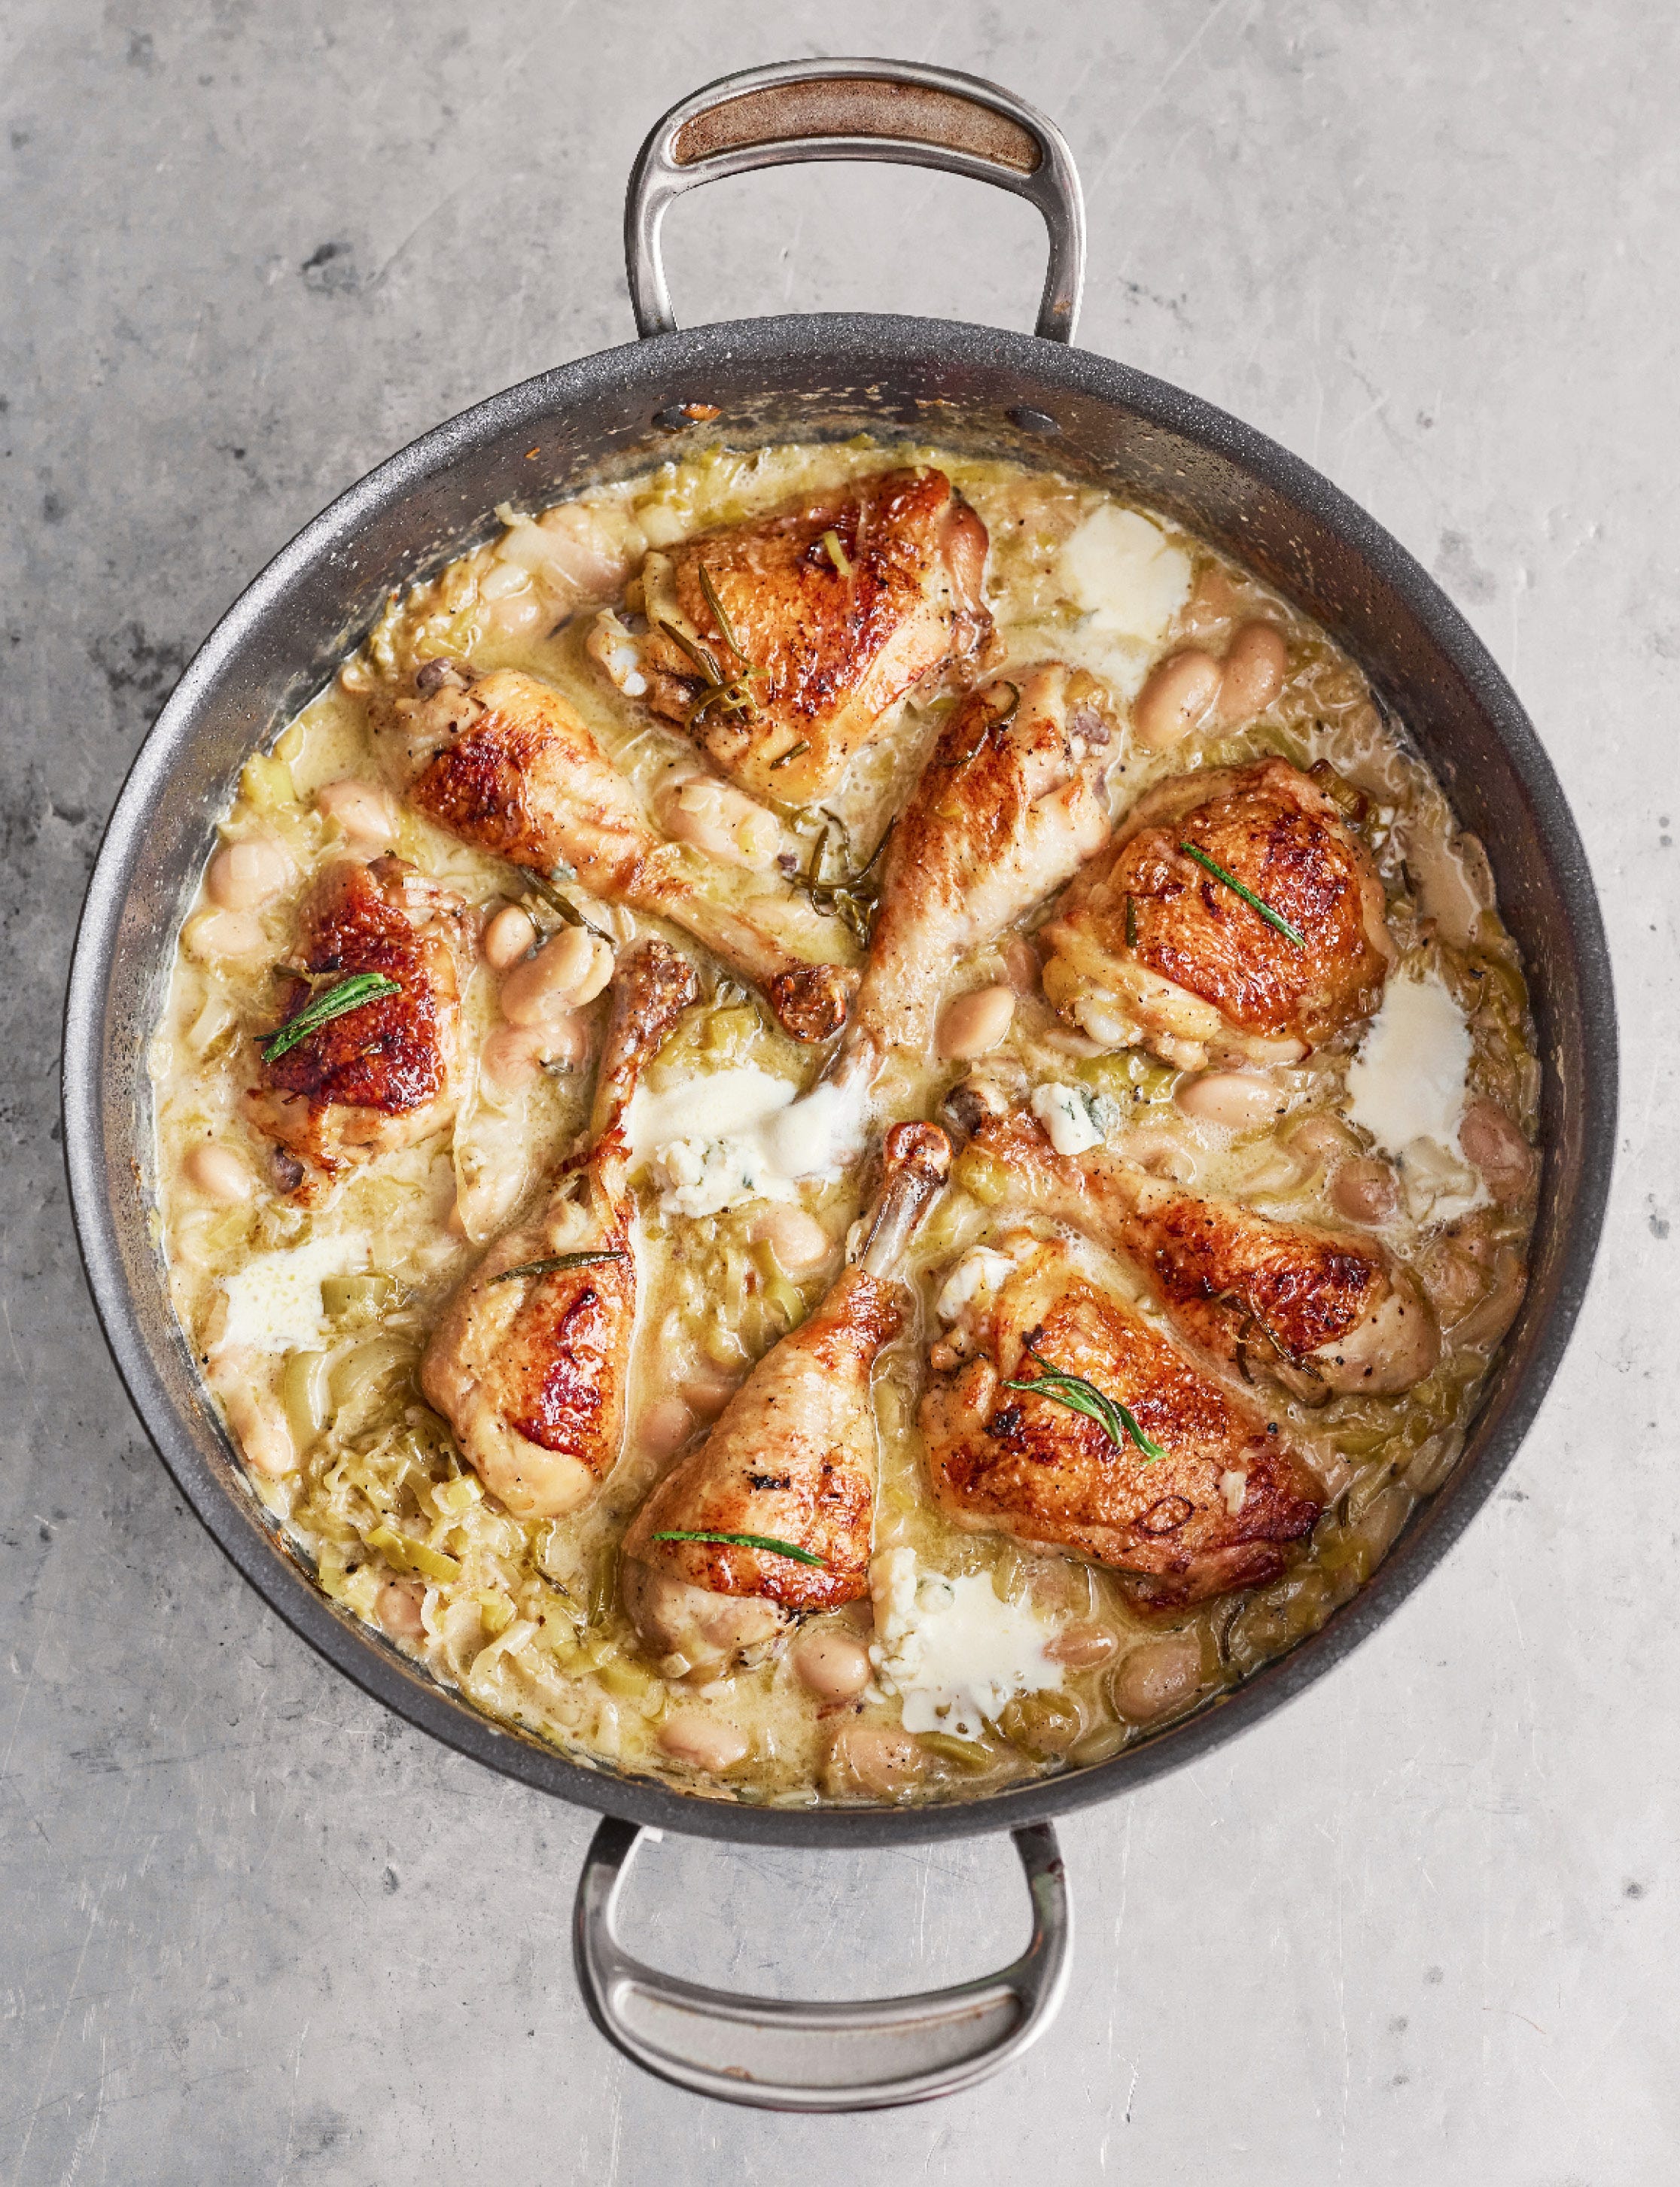 Chef Jamie Oliver says this roast chicken is a 'home run'